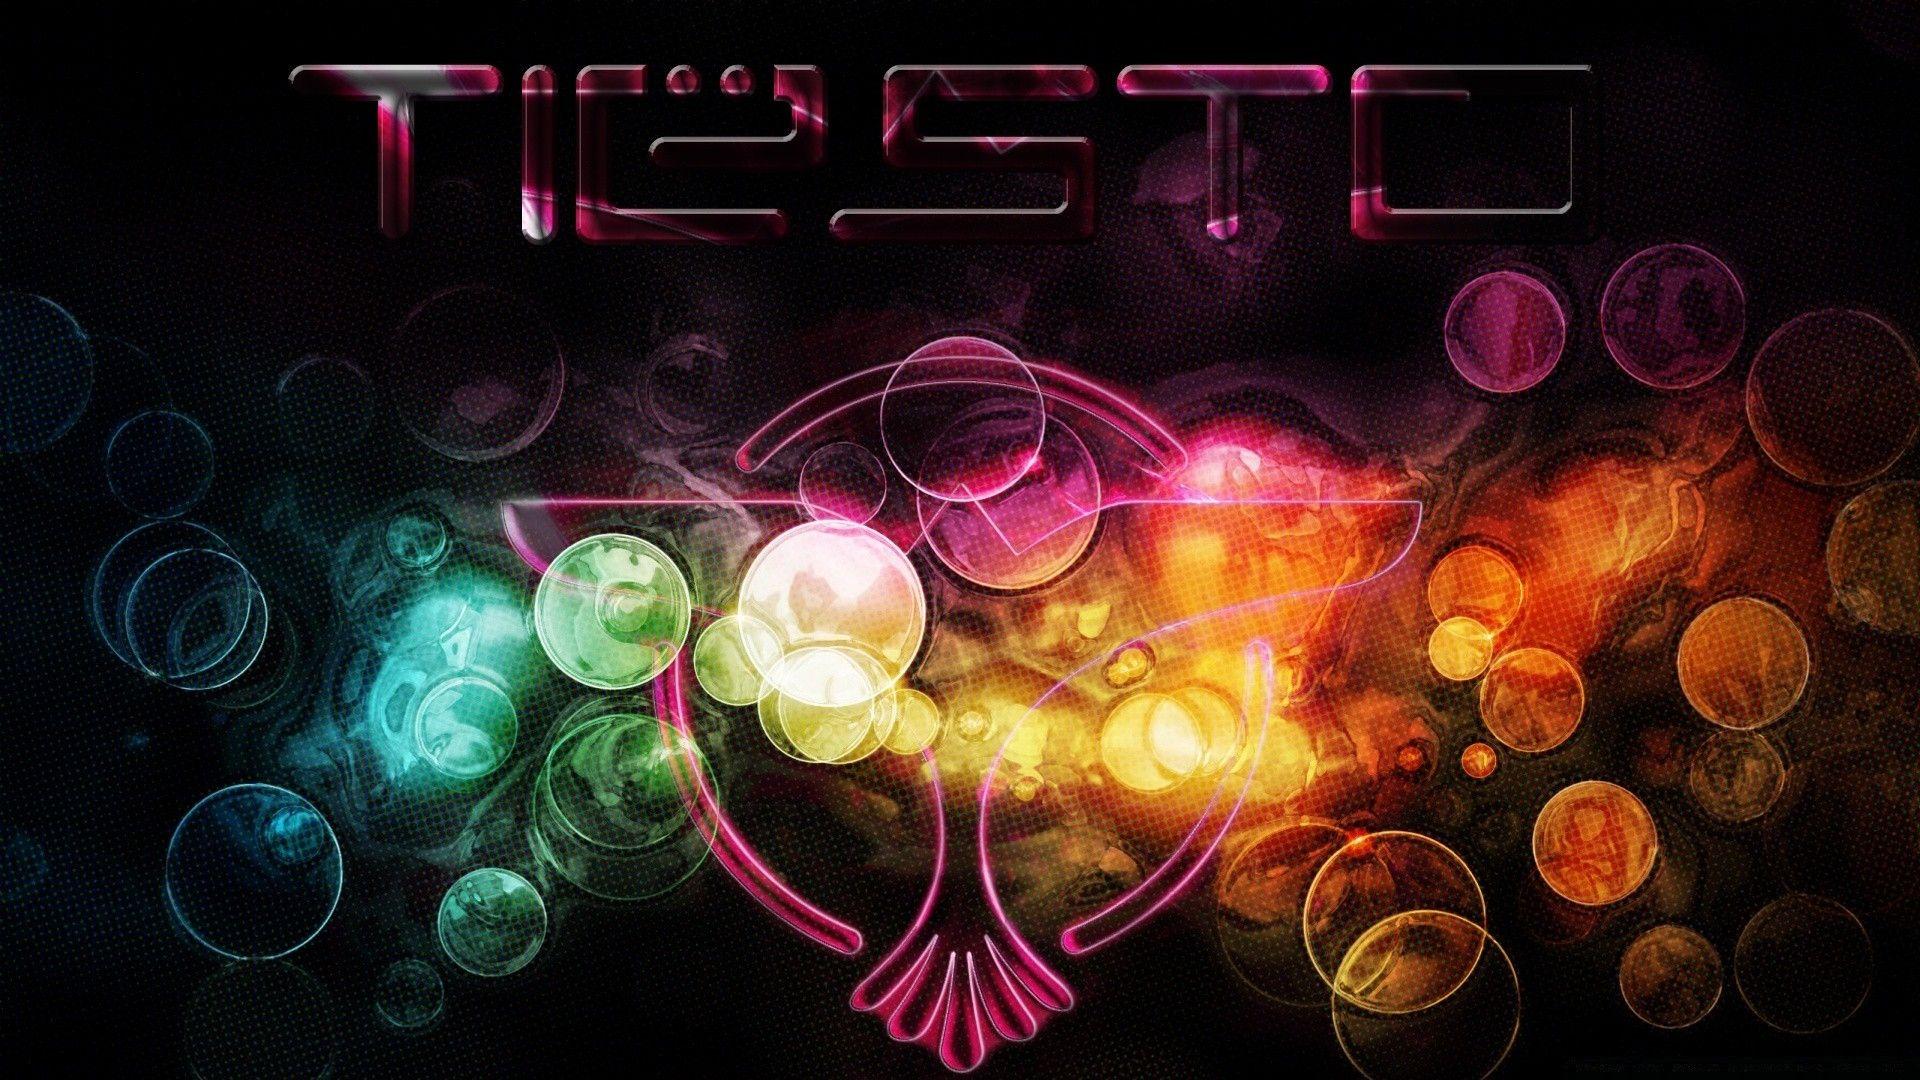 Tiesto. Android wallpaper for free